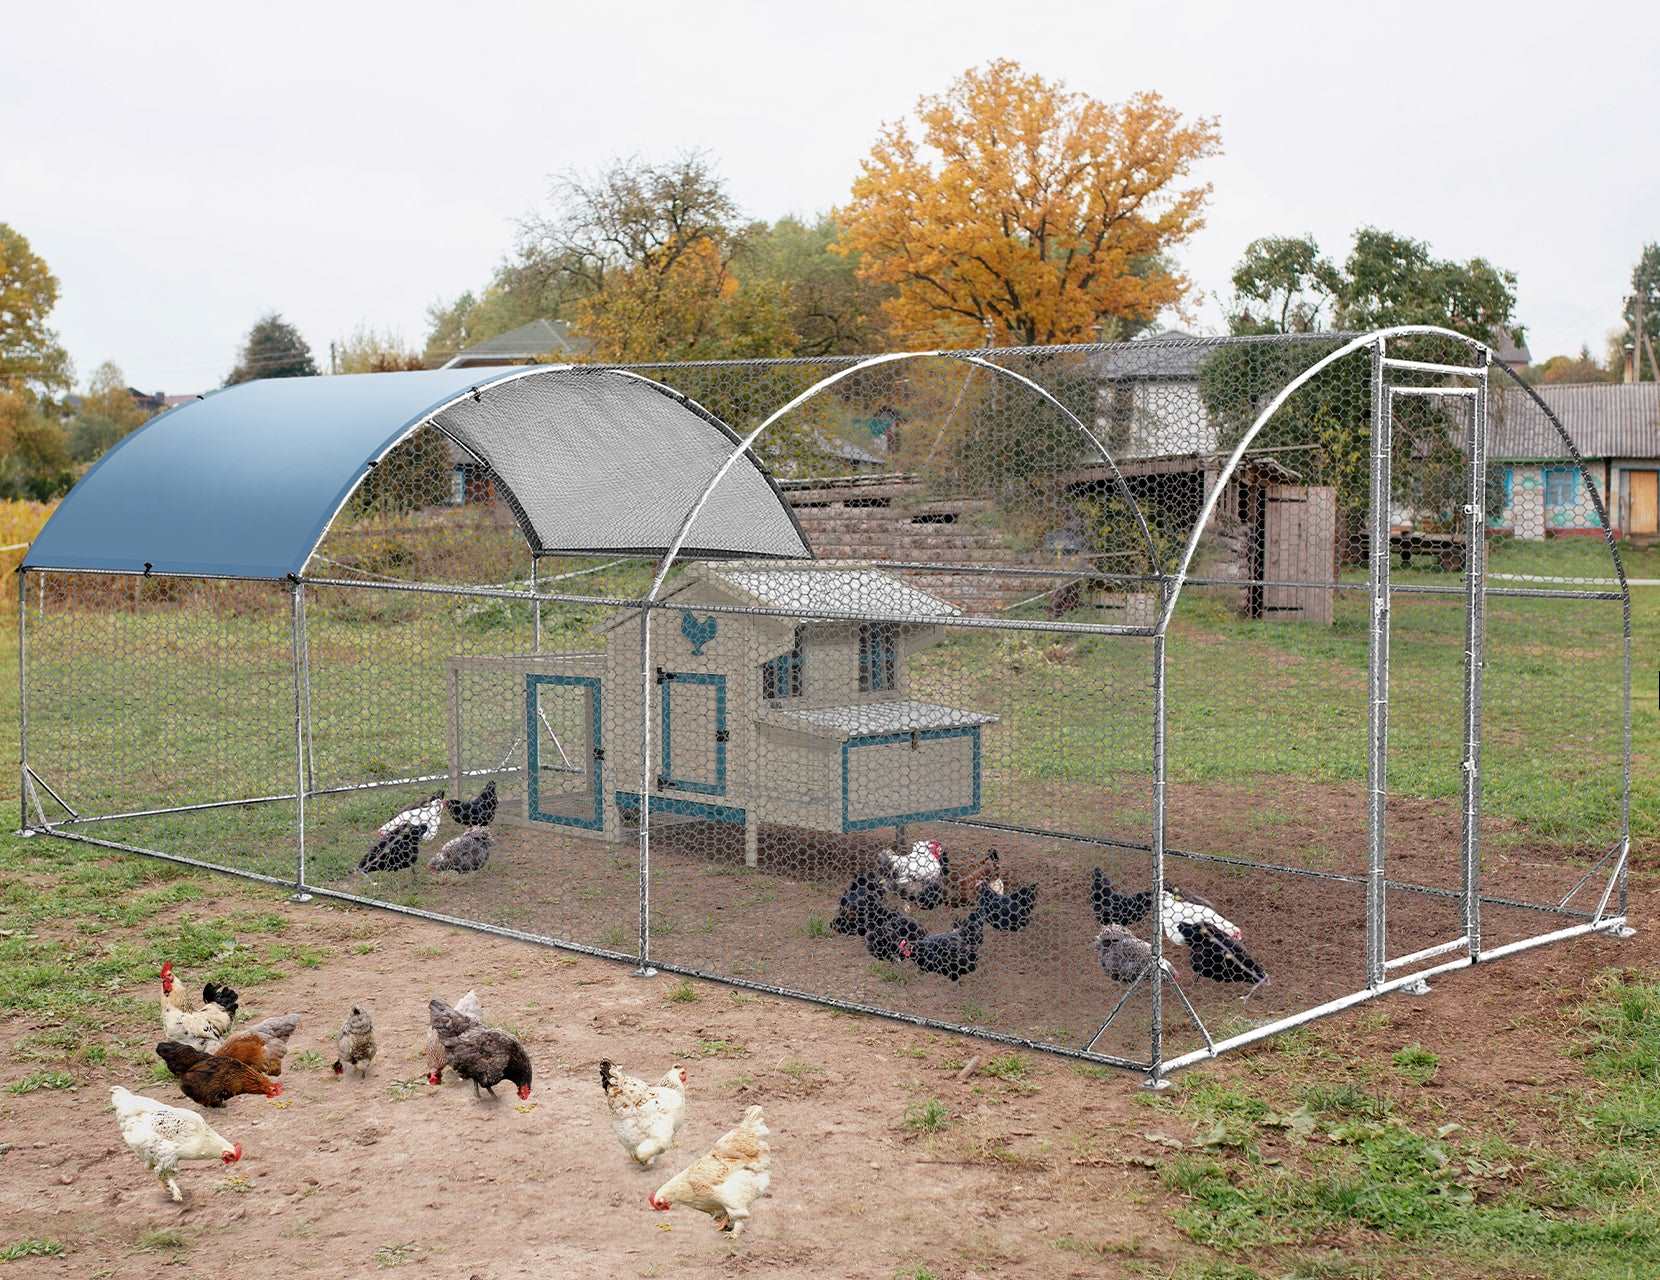 petsfit-chicken-coop-with-anti-rust-durable-steel-420d-anti-ultraviolet-waterproof-cover-large-walk-in-poultry-cage-chicken-pen-for-outdoor-farm-use-09